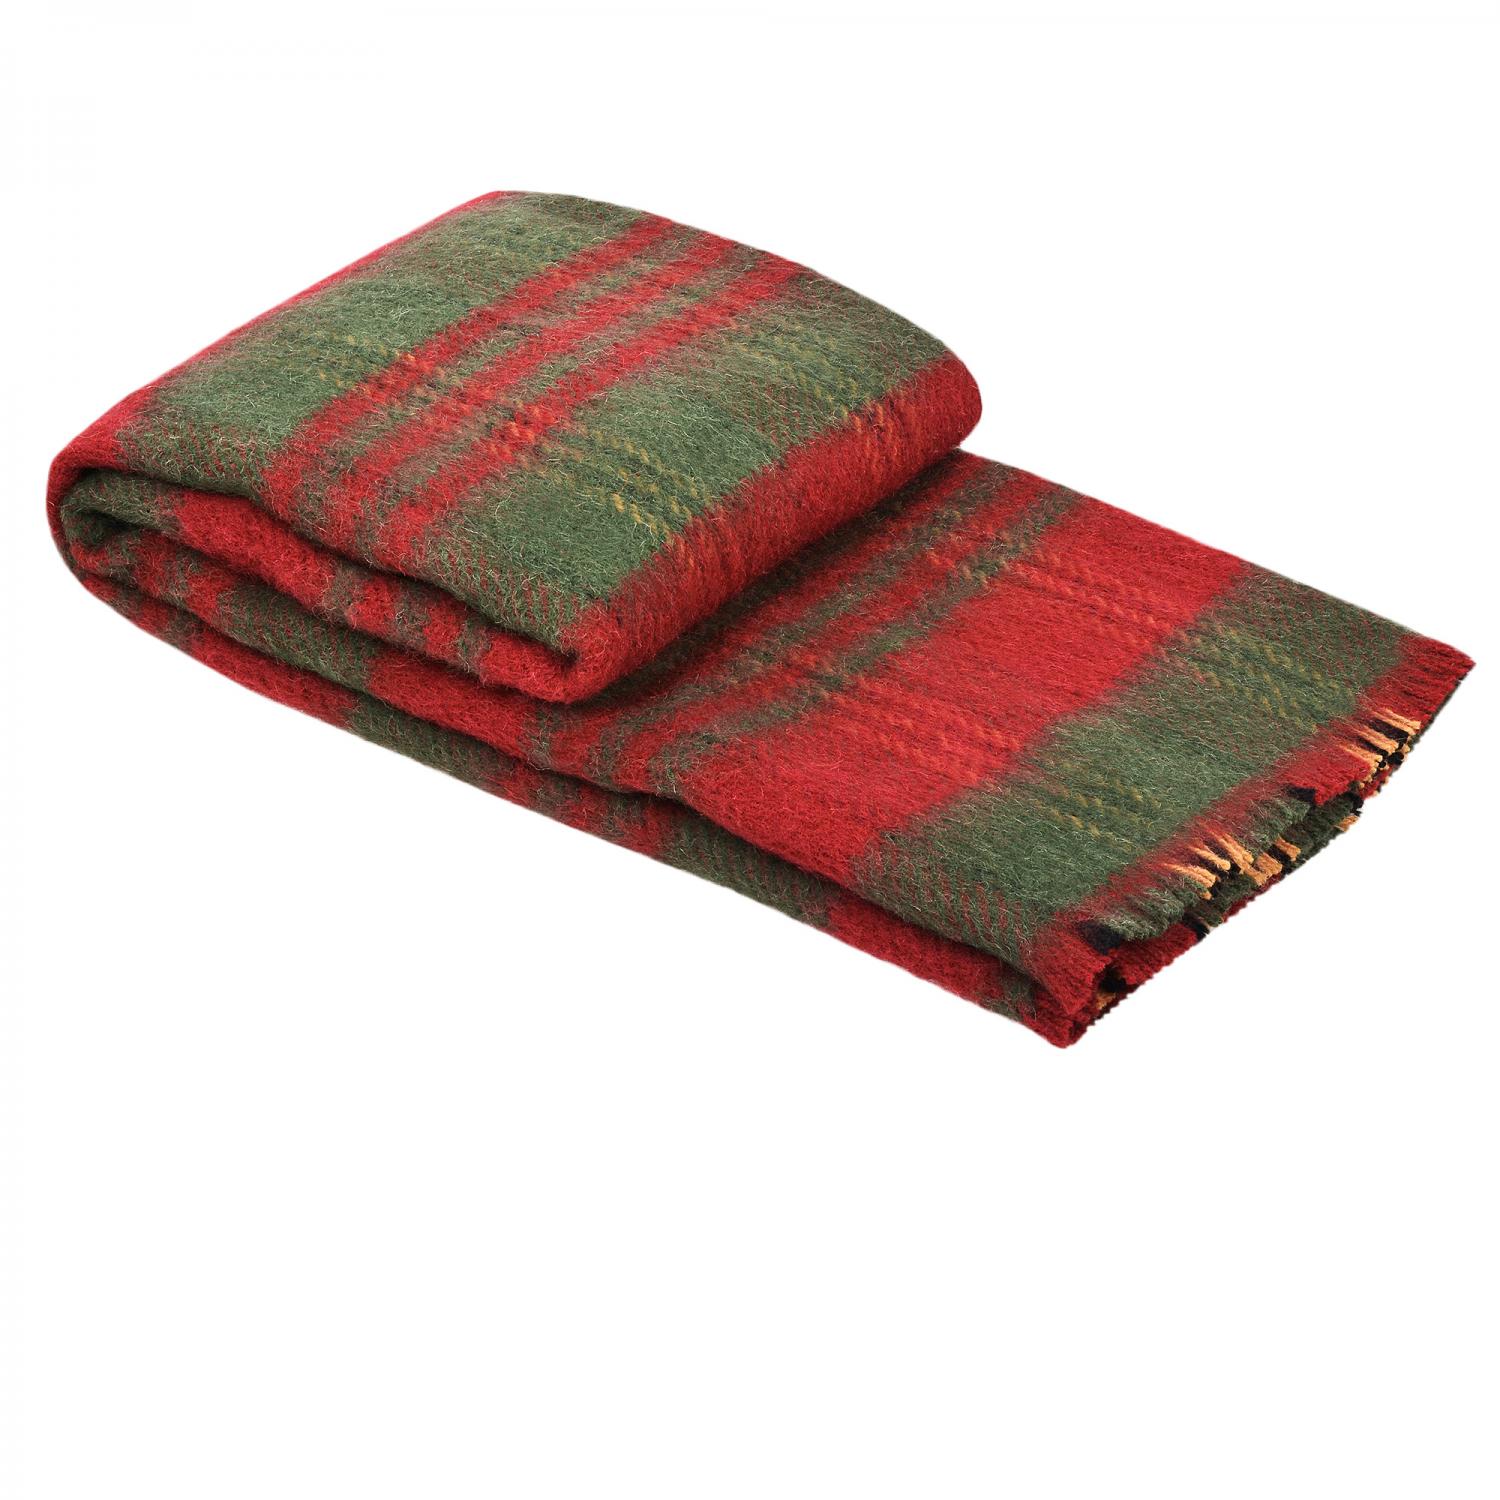 100 Heavy Wool Blanket Balkan Interblanket Online Shop For Wool And Cotton Blankets And Throws